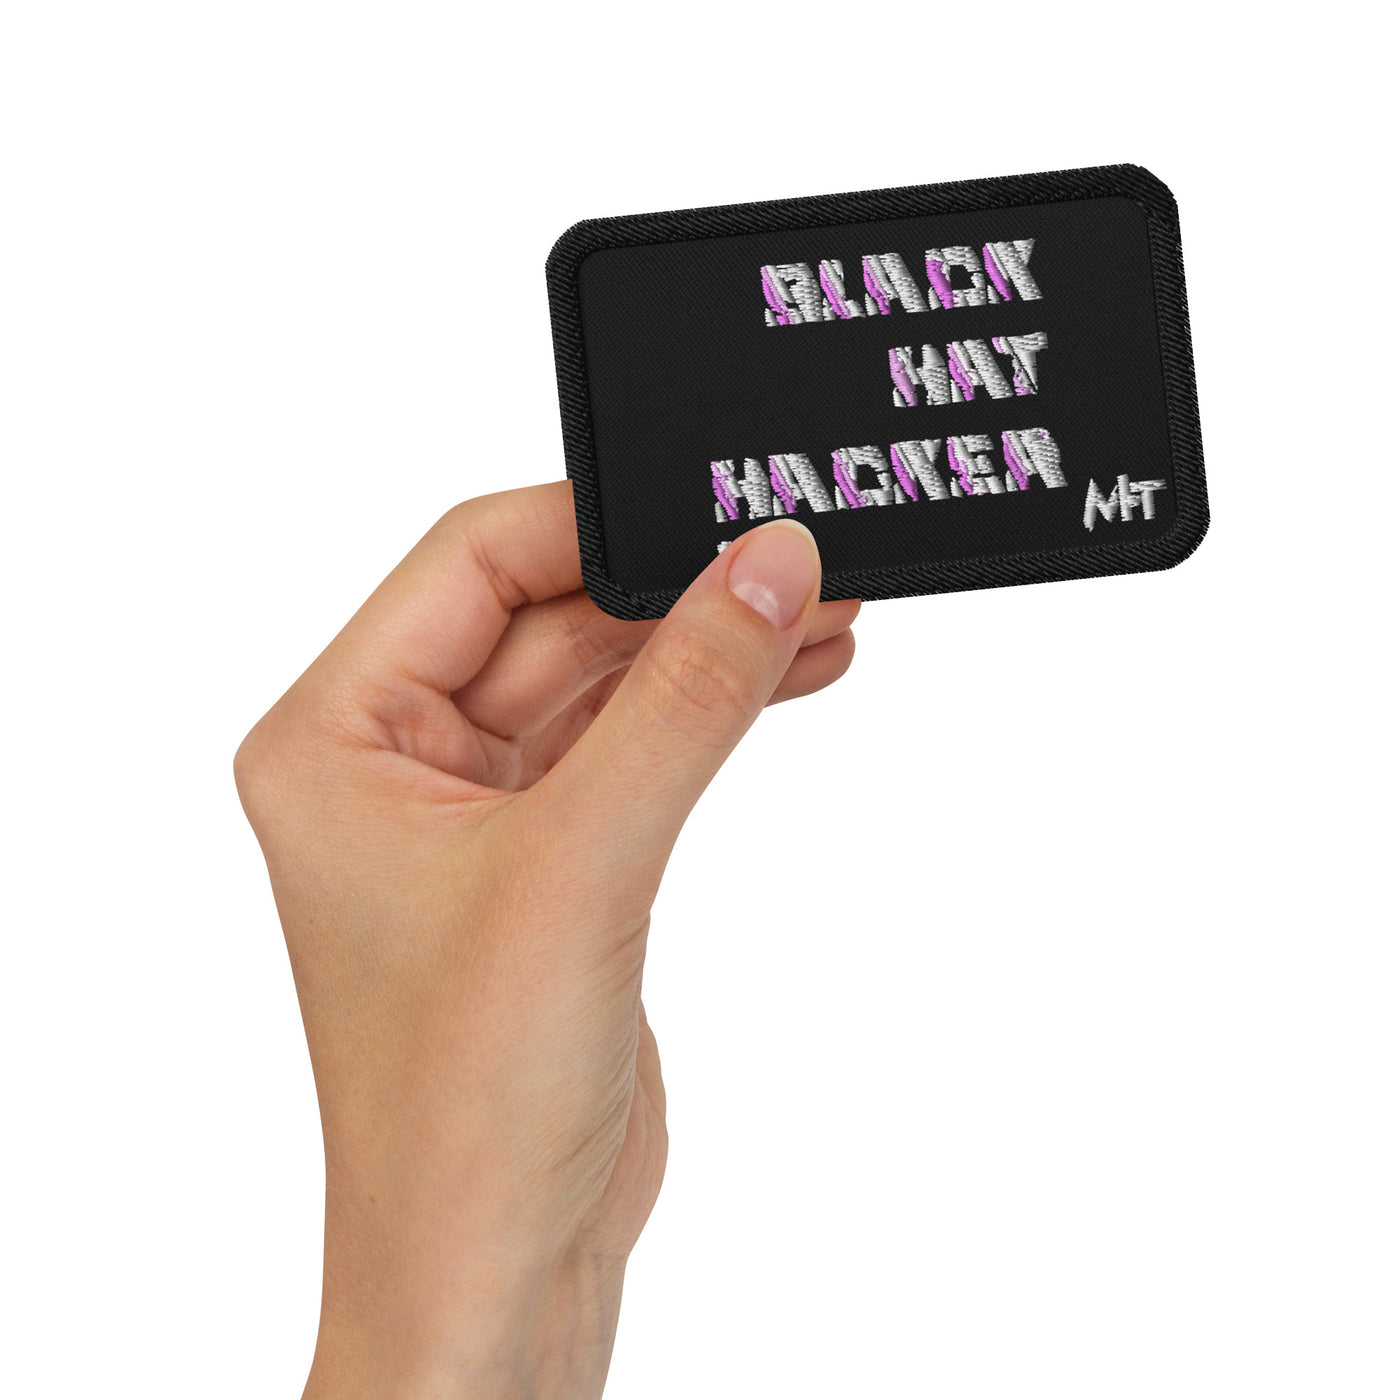 Black Hat Hacker V13 - Embroidered patches